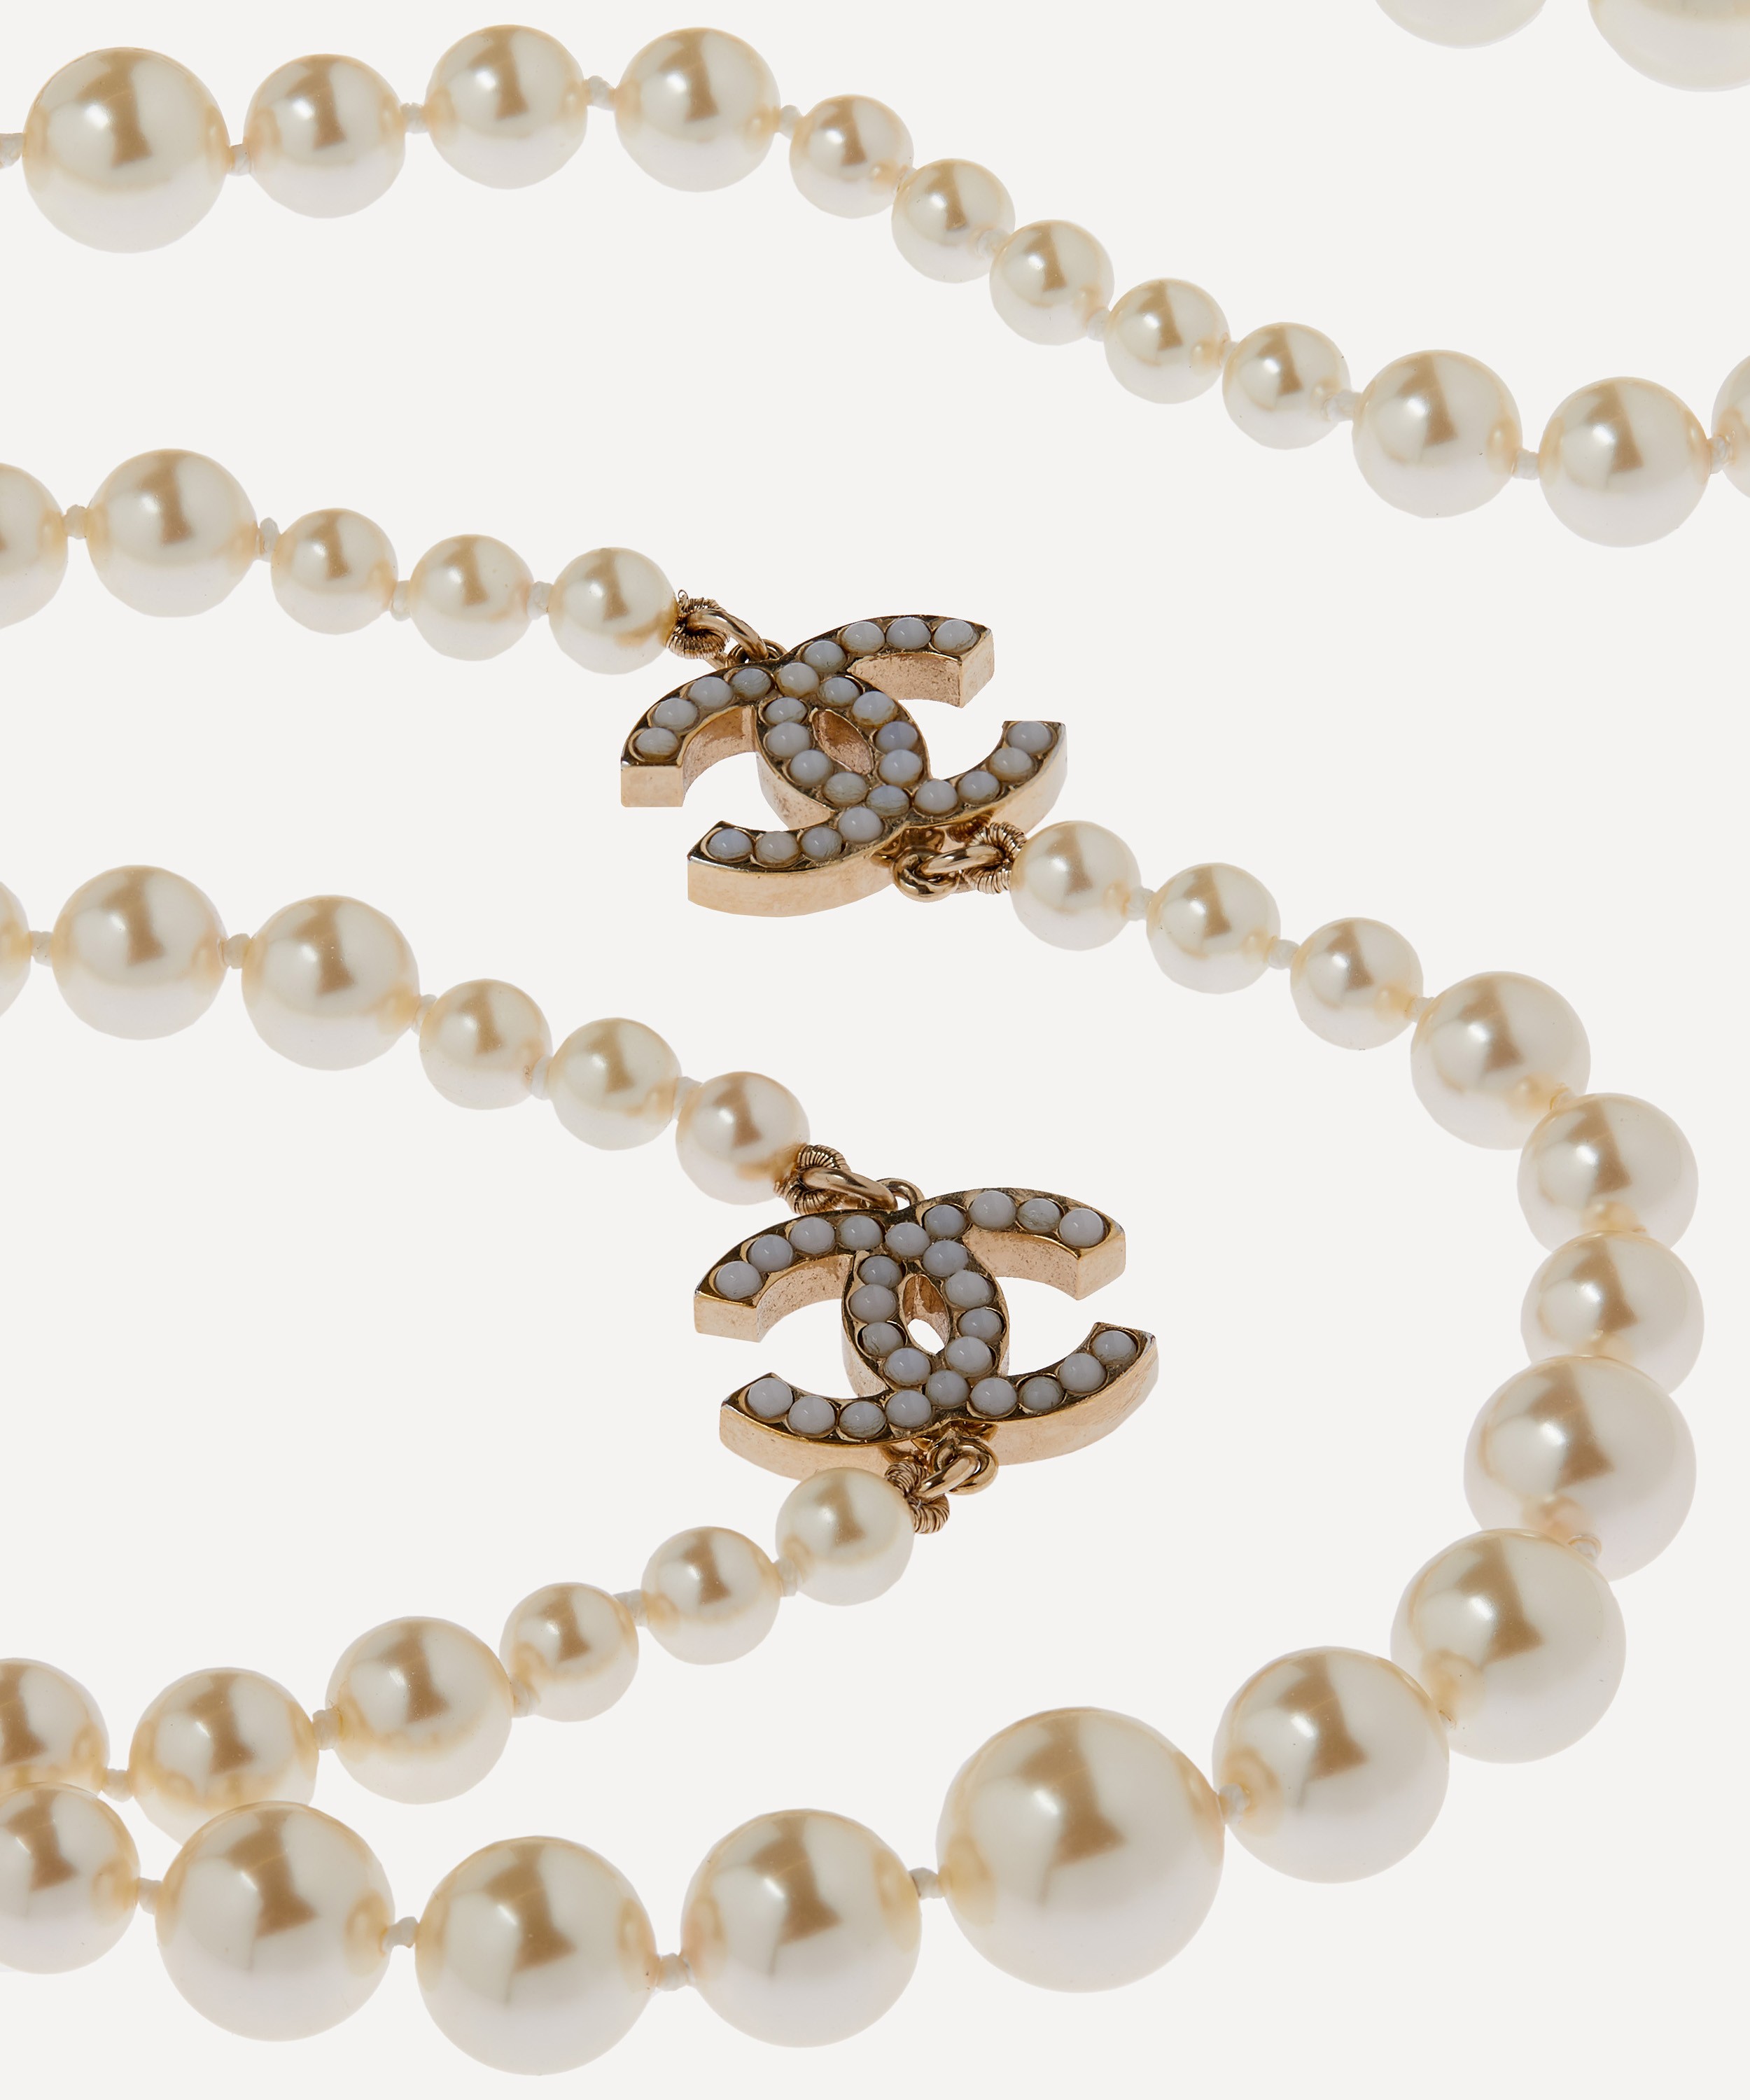 $211,500 Jackie Kennedy's Legendary 3 Strand Faux Pearl Necklace - HubPages